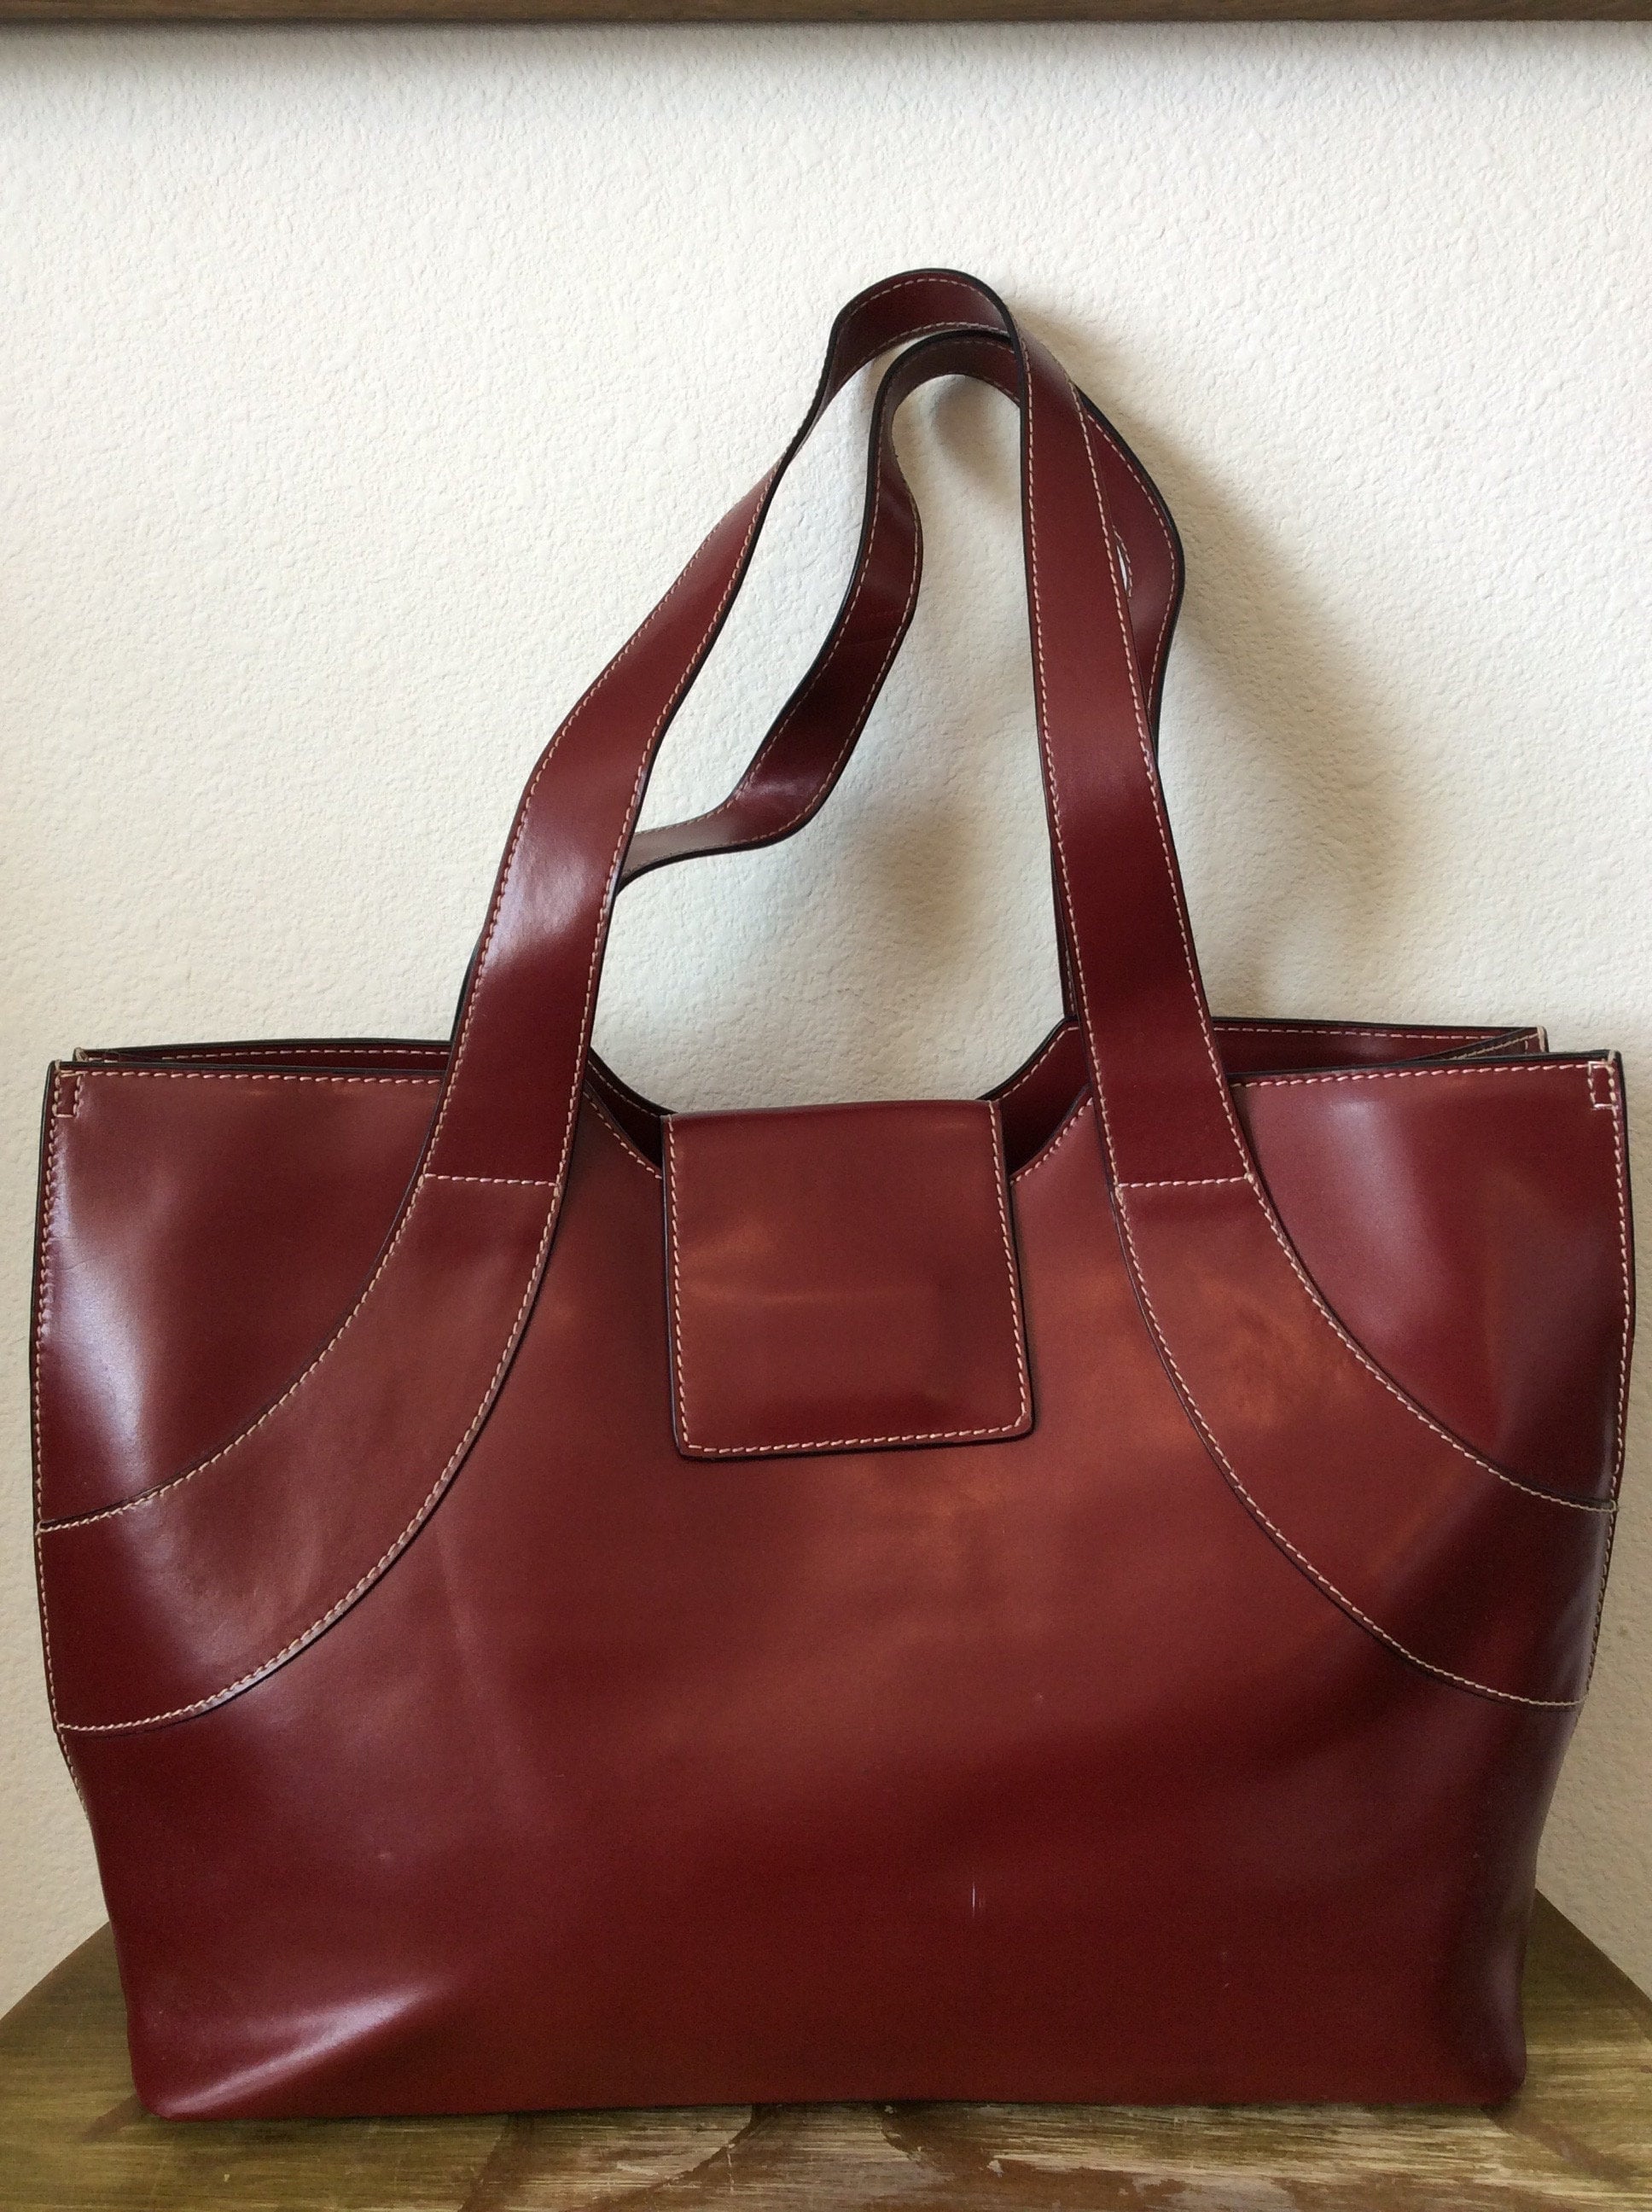 Franklin Covey Red Leather Shoulder Tote Bag with Compartments 16×13